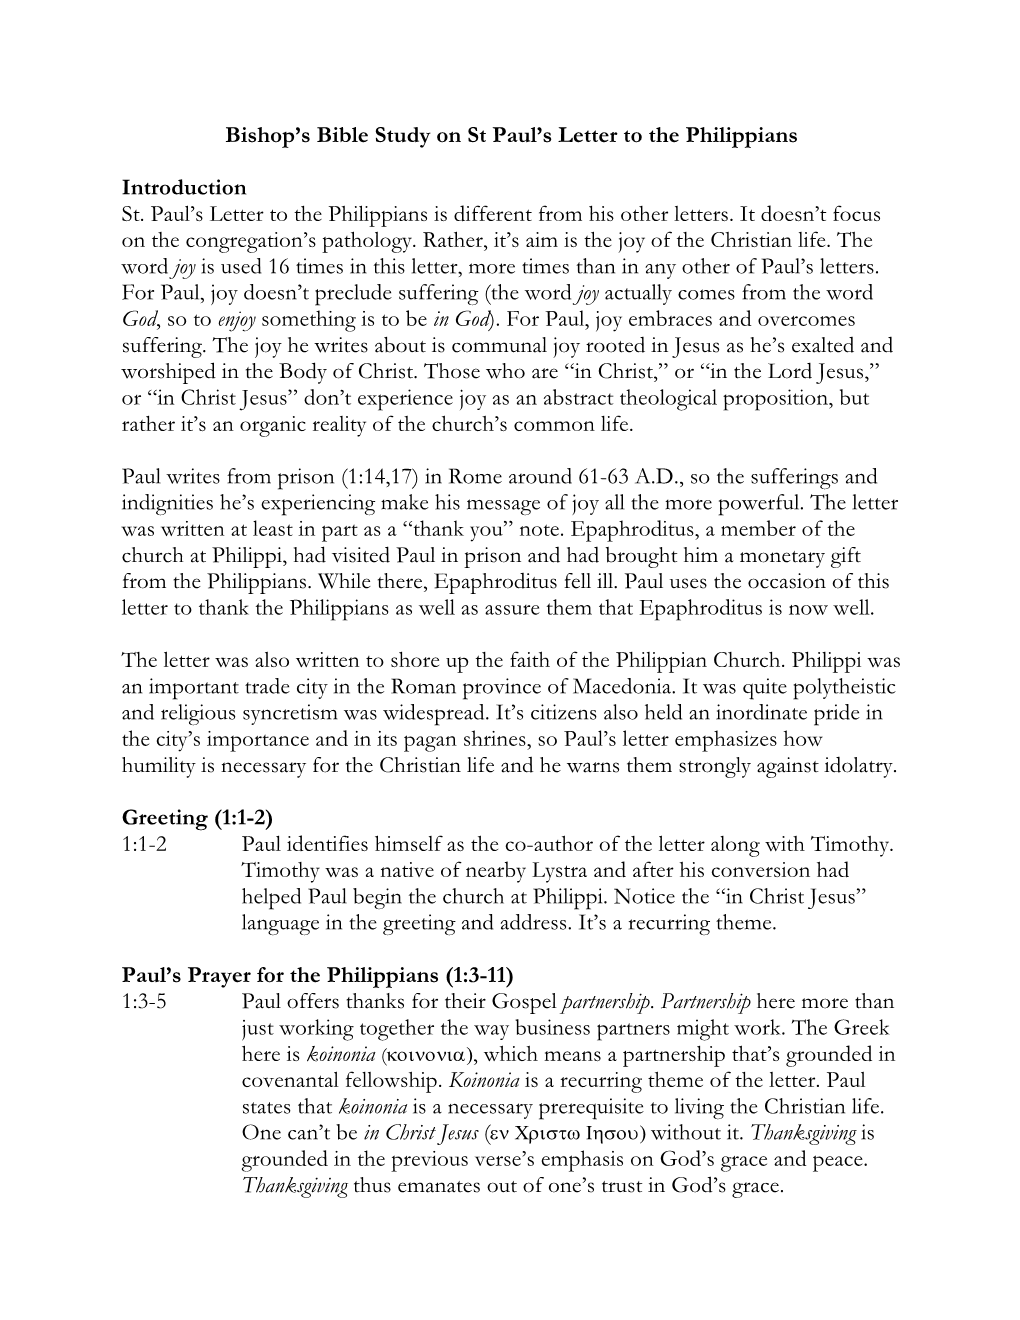 Bishop's Bible Study on St Paul's Letter to the Philippians Introduction